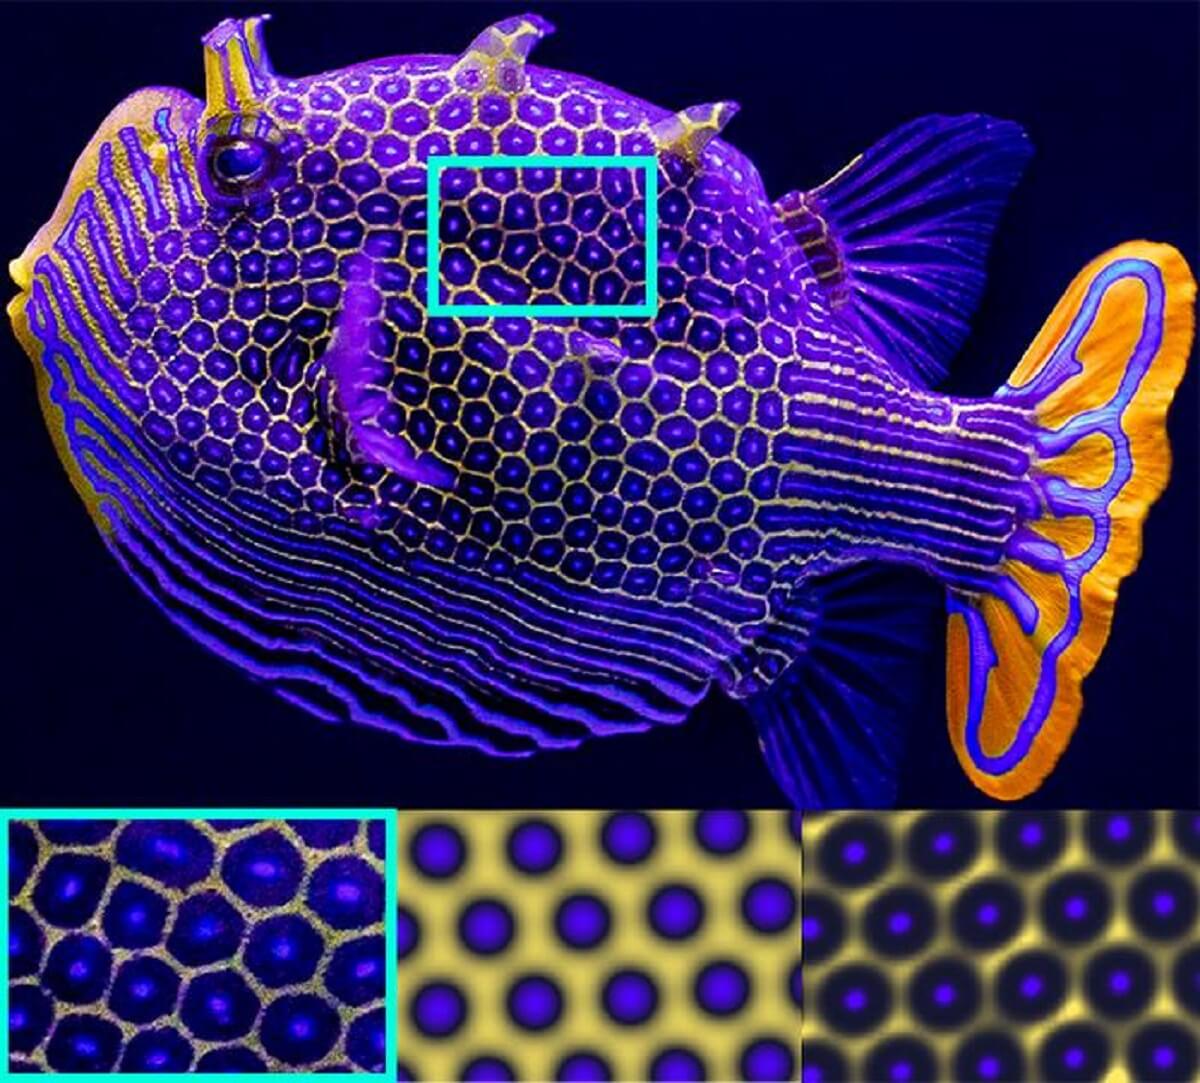 Top: A male Ornate Boxfish (Aracana ornata). Bottom left: A close-up picture of the fish’s natural hexagonal pattern. Bottom center: Fish pattern simulation based on Turing’s reaction-diffusion theory. Bottom right: Diffusiophoresis-enhanced reaction-diffusion simulation.